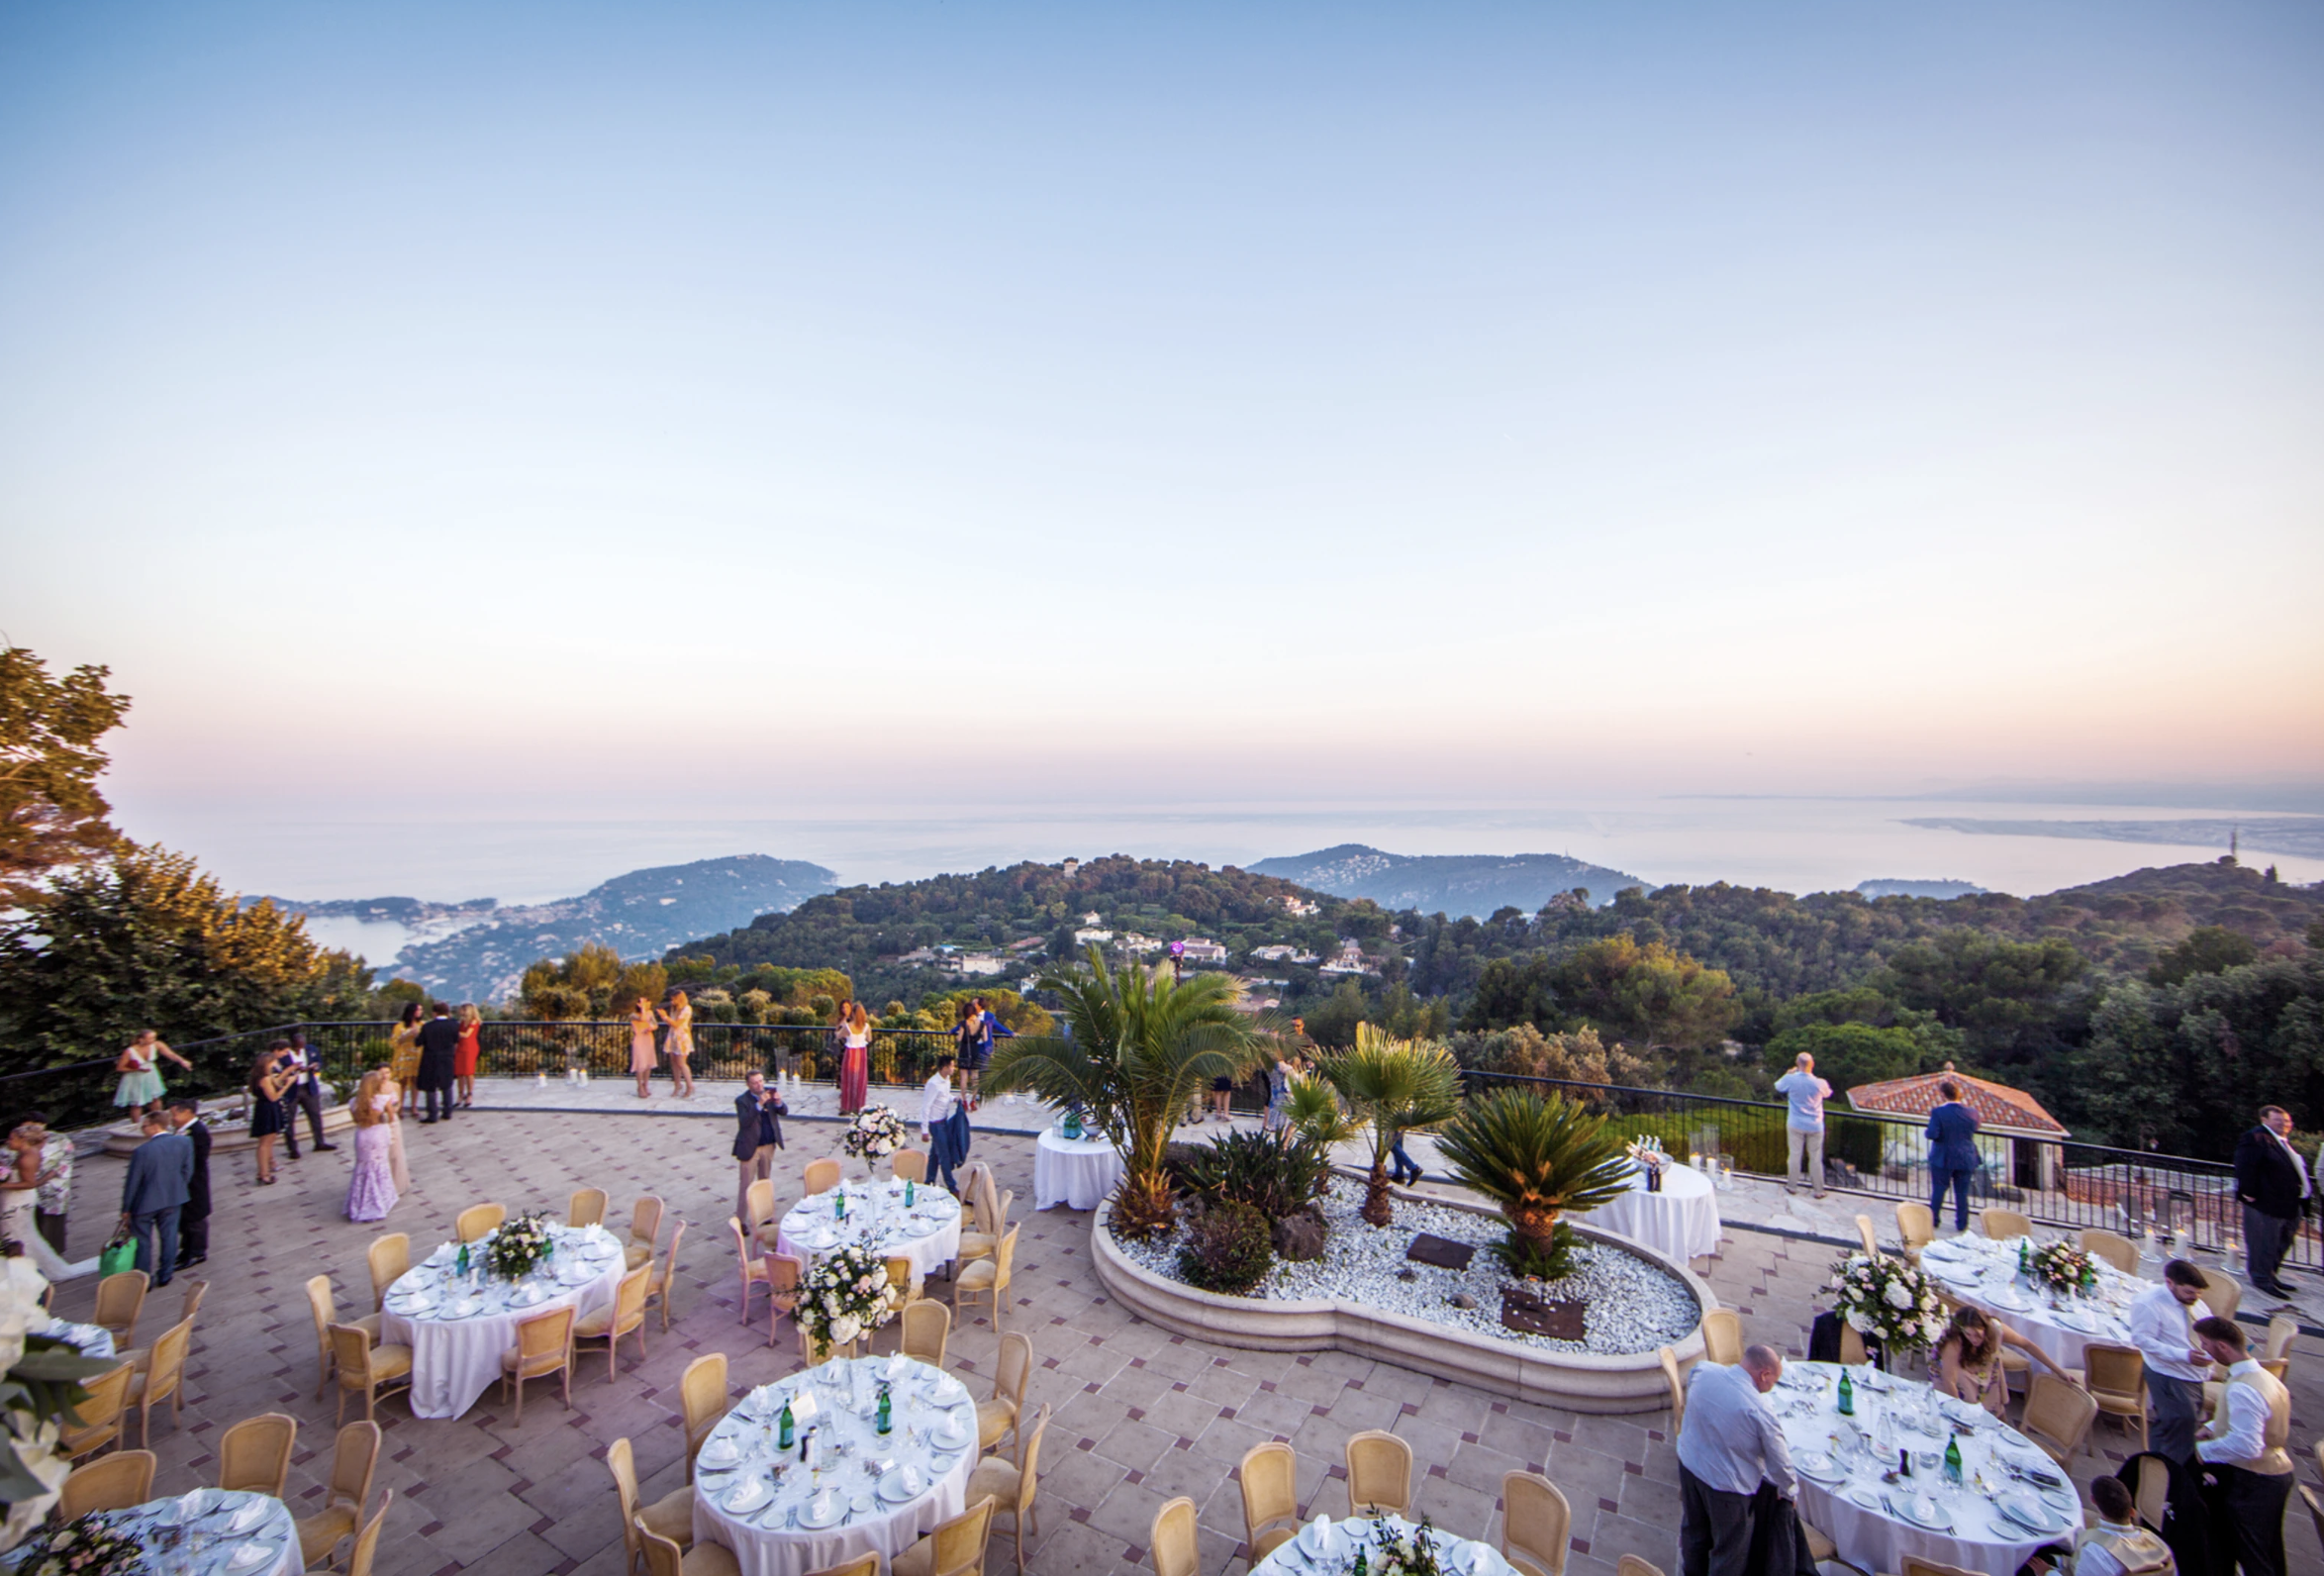 views from the wedding venue domaine du mont leuze in villefranche, France. The view overlooks the mediterranean sea and the french riviera from a high hill.